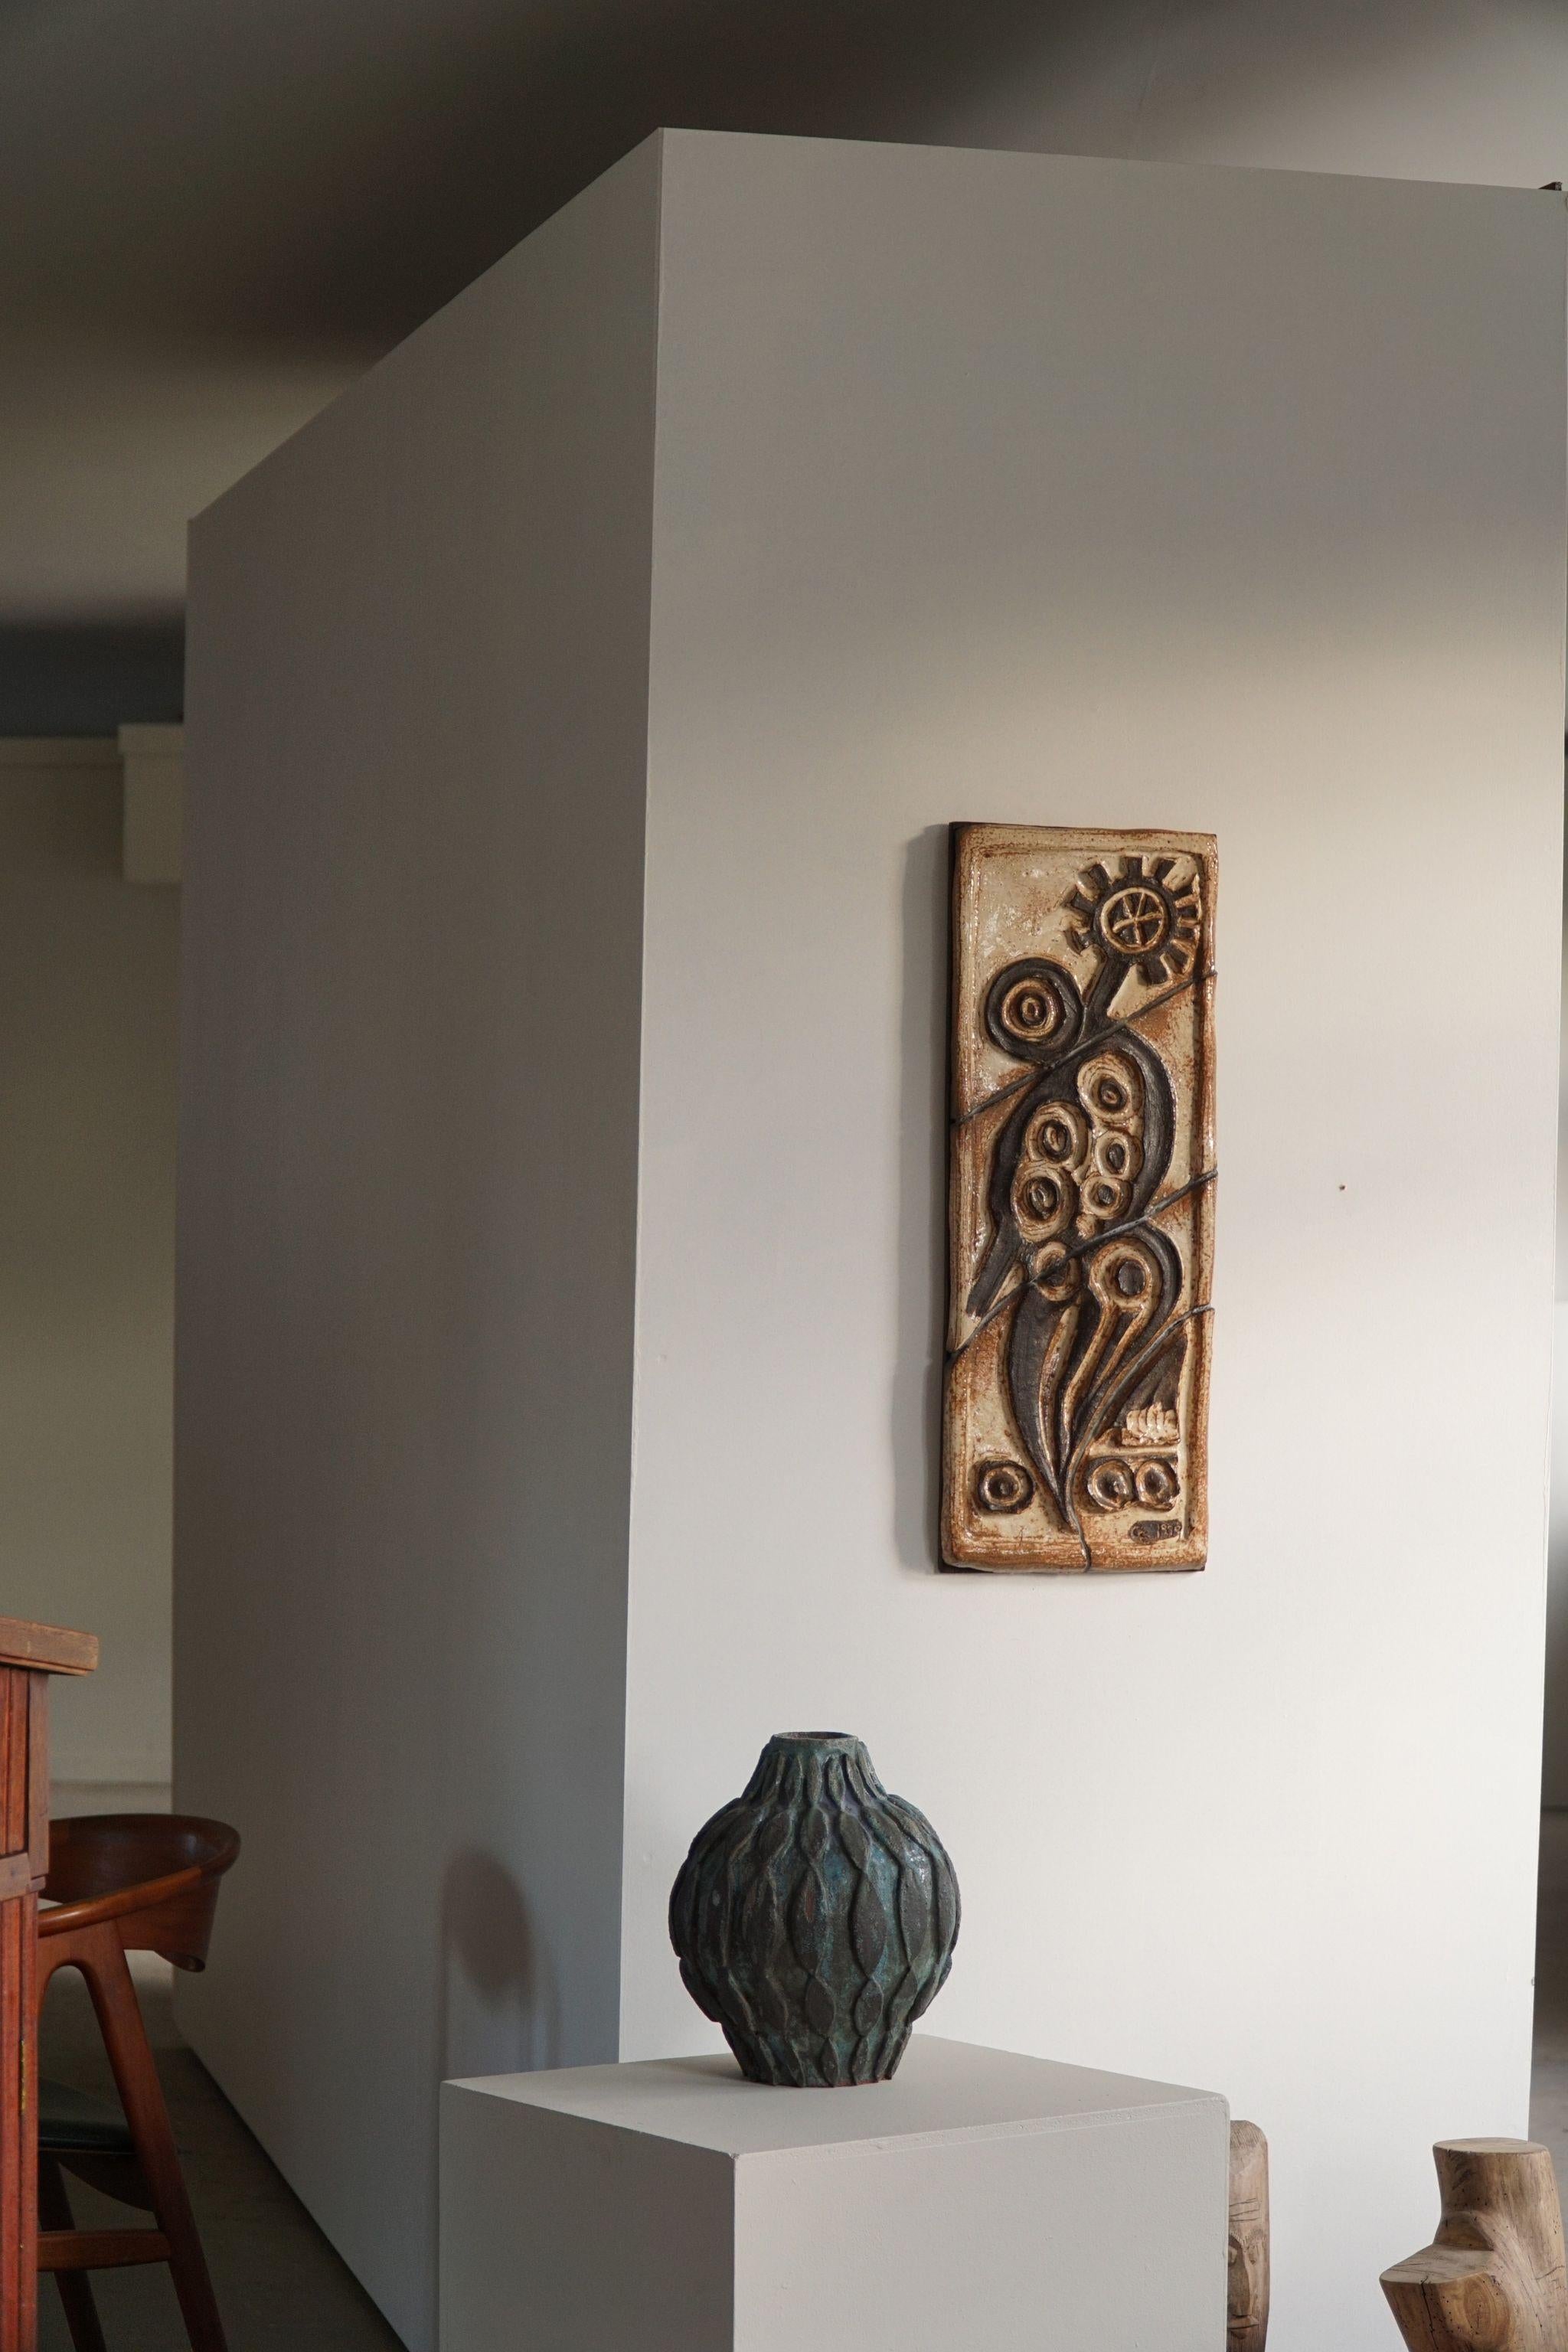 A fine unique sculptural stoneware wall unit in various brown and beige colors, mounted on a wooden plate. Signed CF 1970.

Nice texture and dimensions in this vintage piece. This brutalist object fits in many interior styles. Modern interior, Art